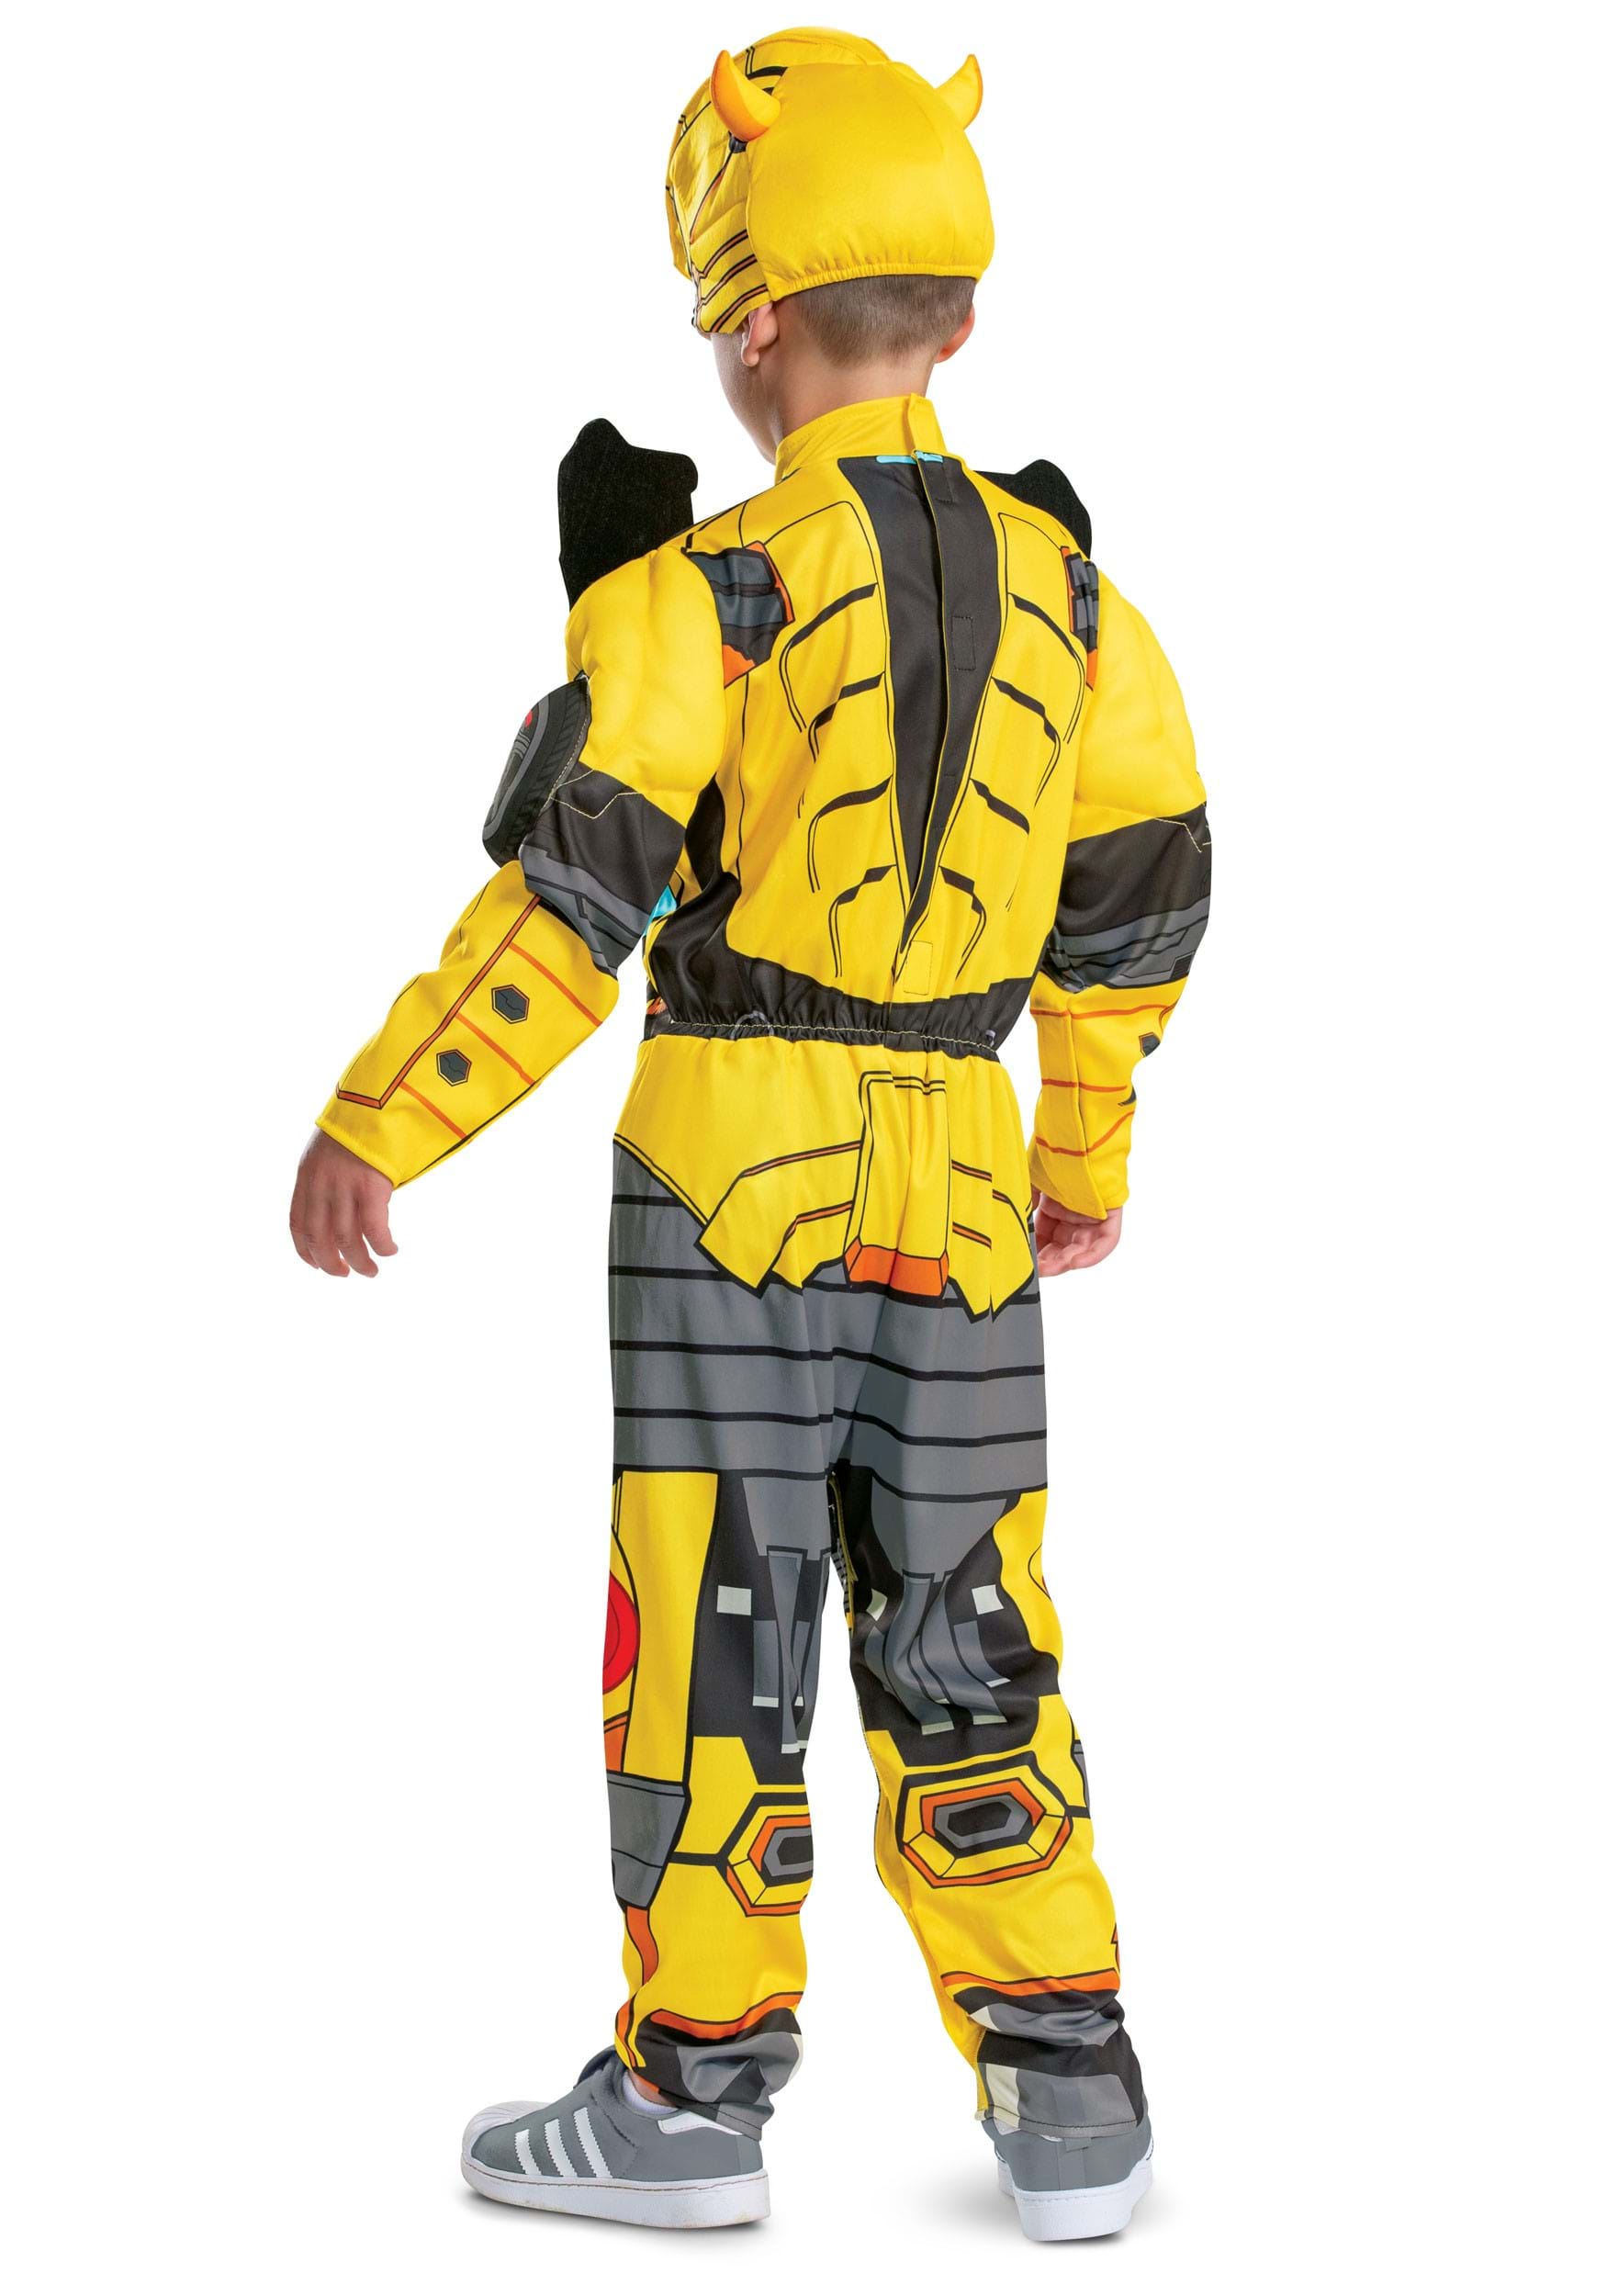 Transformers Bumblebee Adaptive Costume For Kids